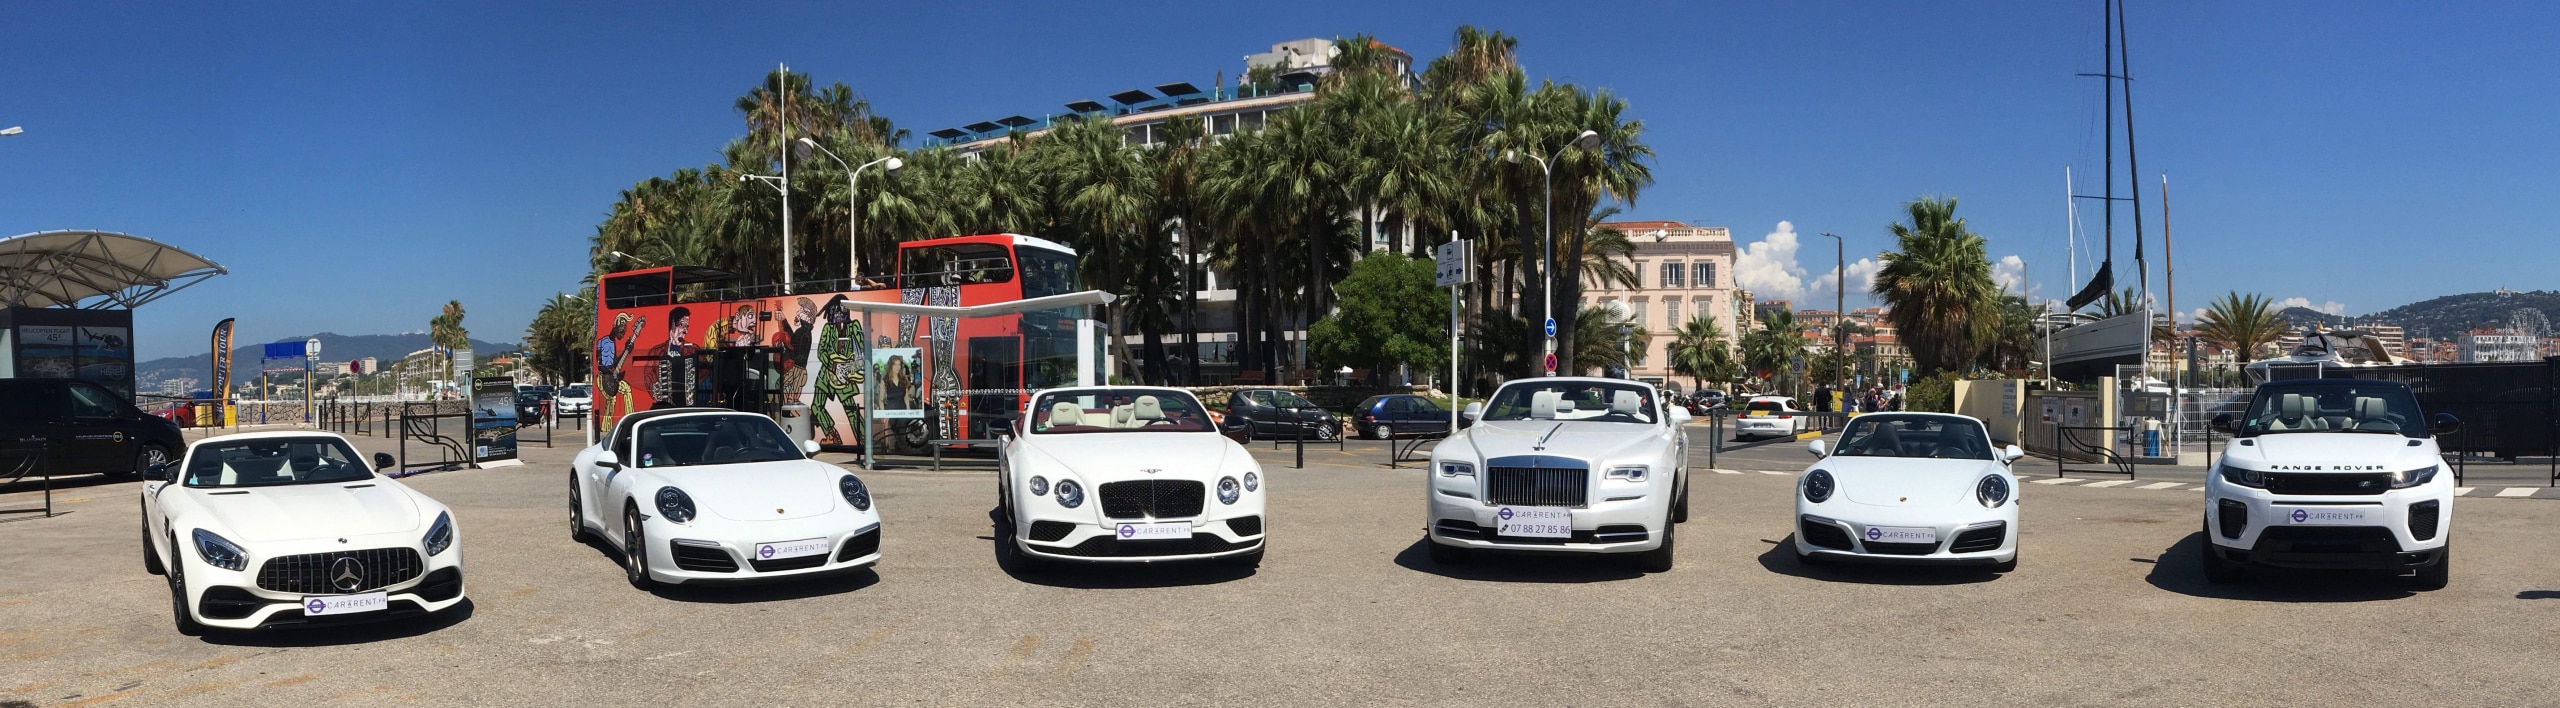 White-collection-Car4rent-Cannes